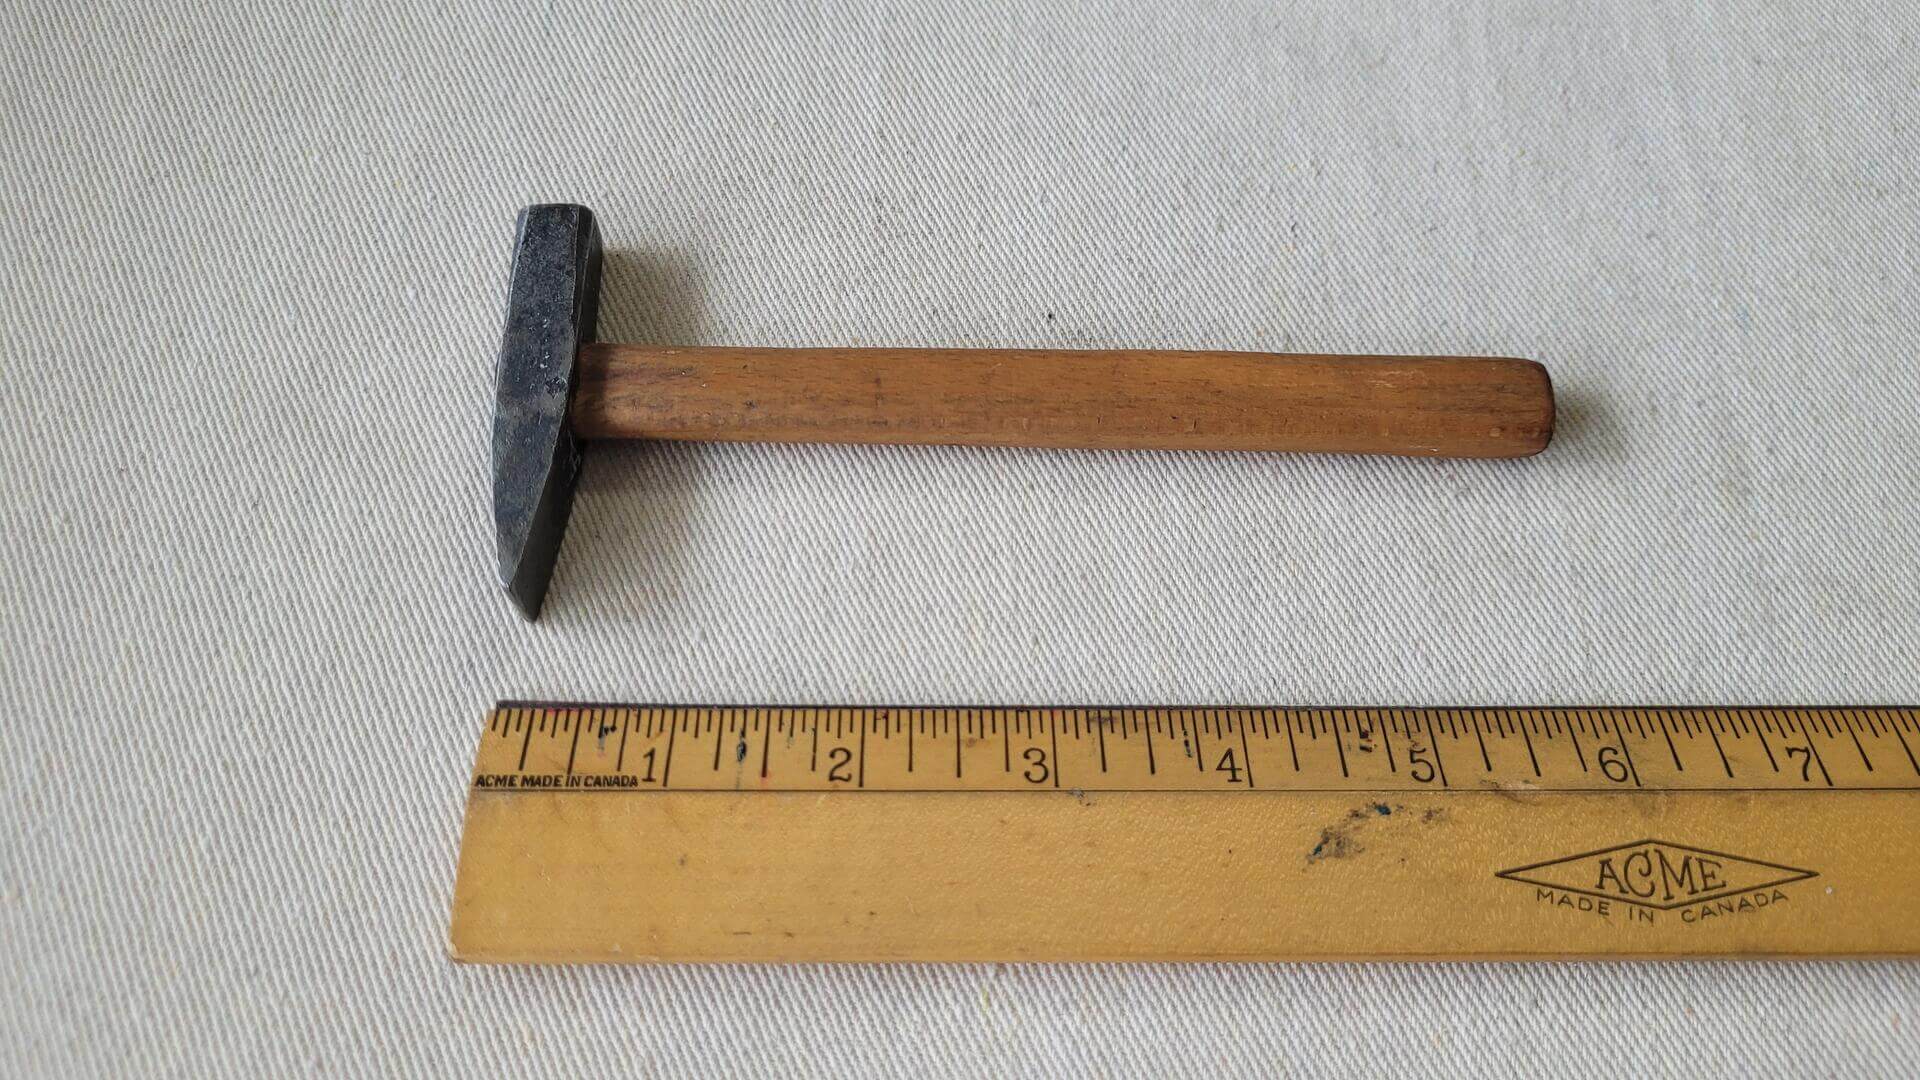 Vintage miniature cast steel jewelry and gun smith cross peen hammer 6 inches long with wooden handle. Fine antique collectible striking hand tools